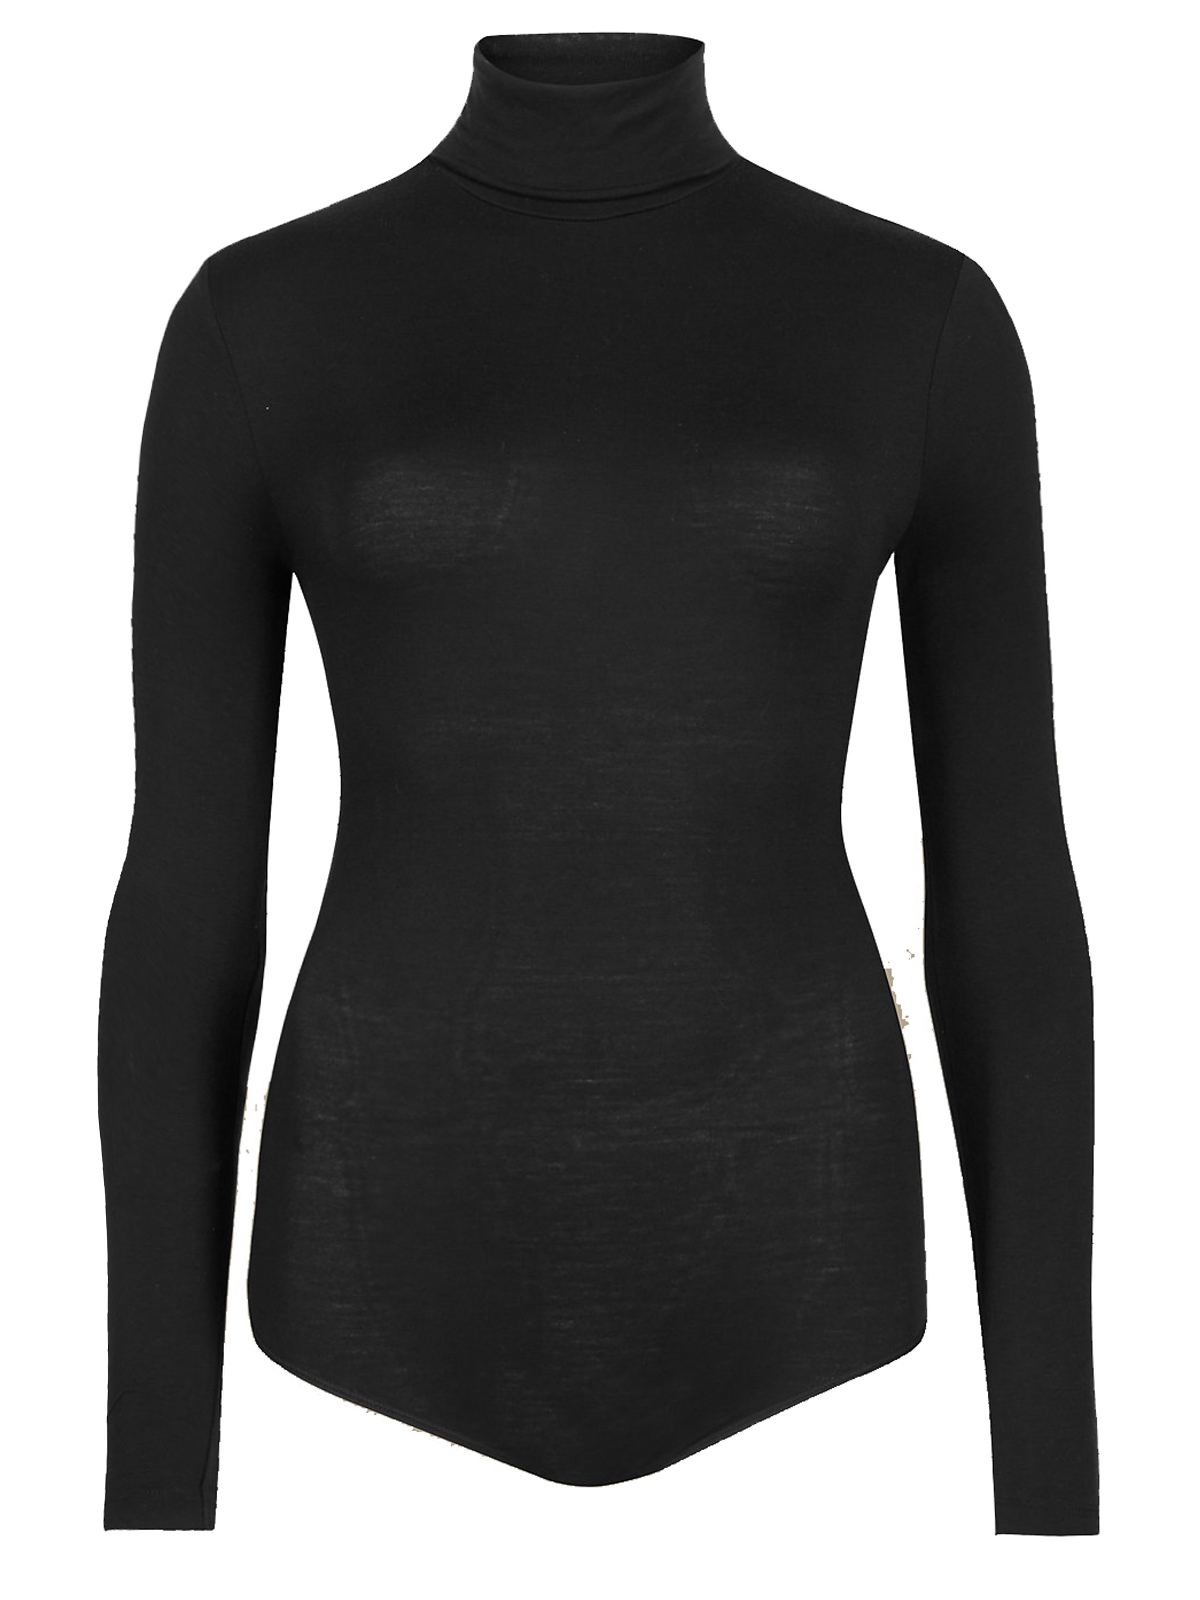 Marks and Spencer - - M&5 BLACK Heatgen Polo Neck Thermal Body - Size 8 ...